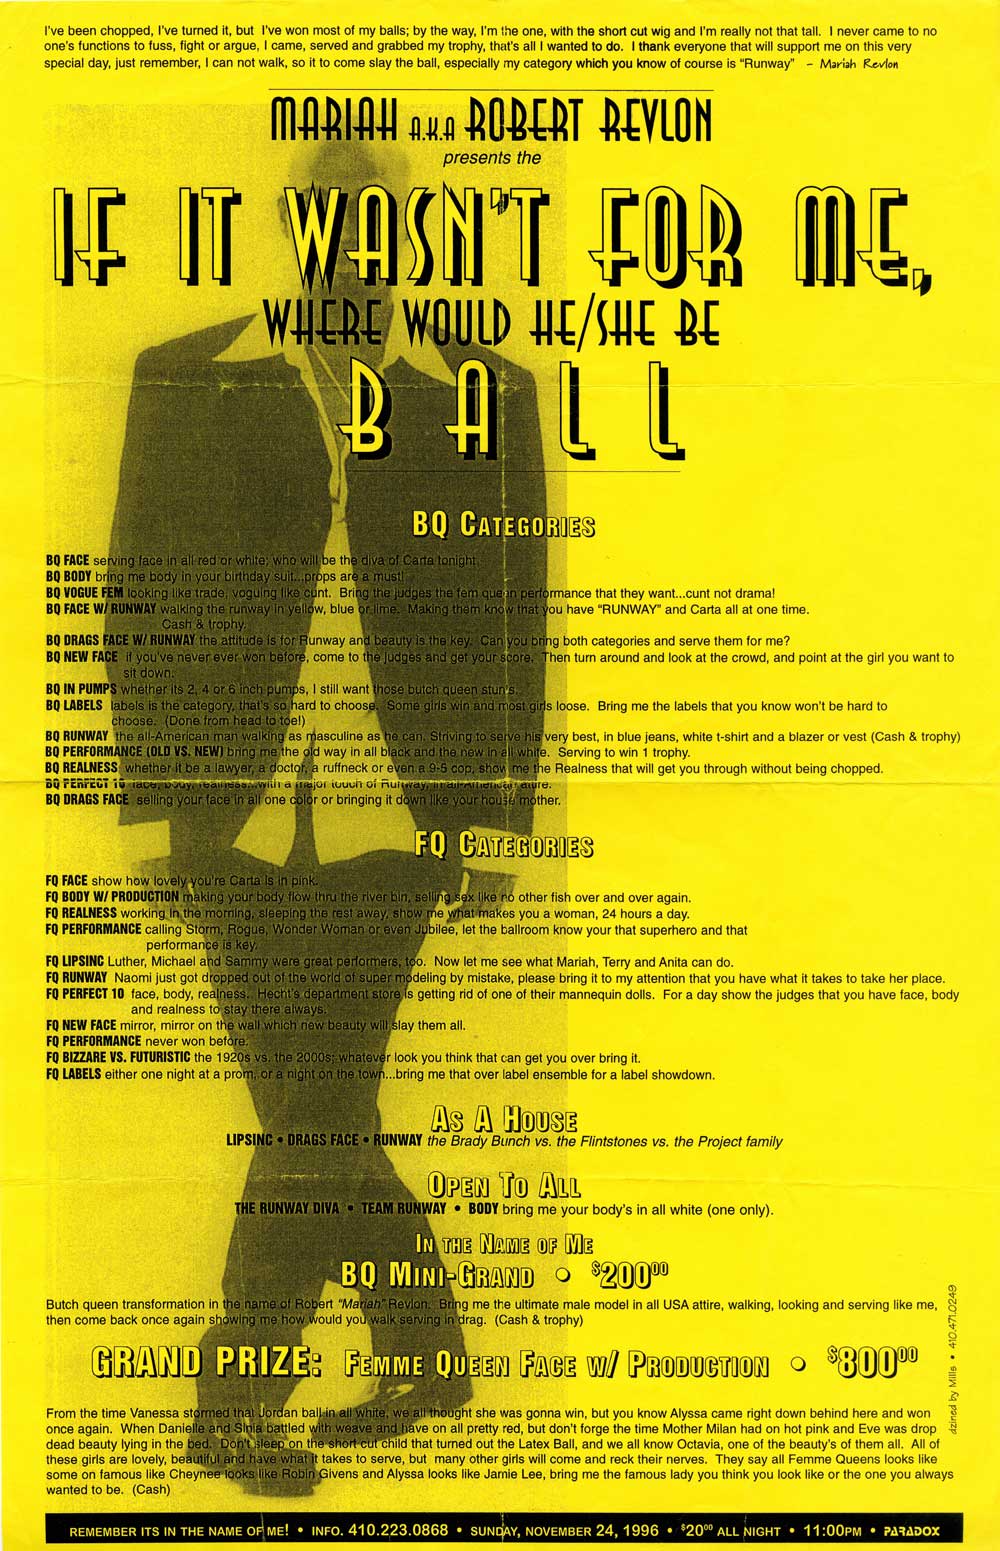 Flyer for an old ball competition